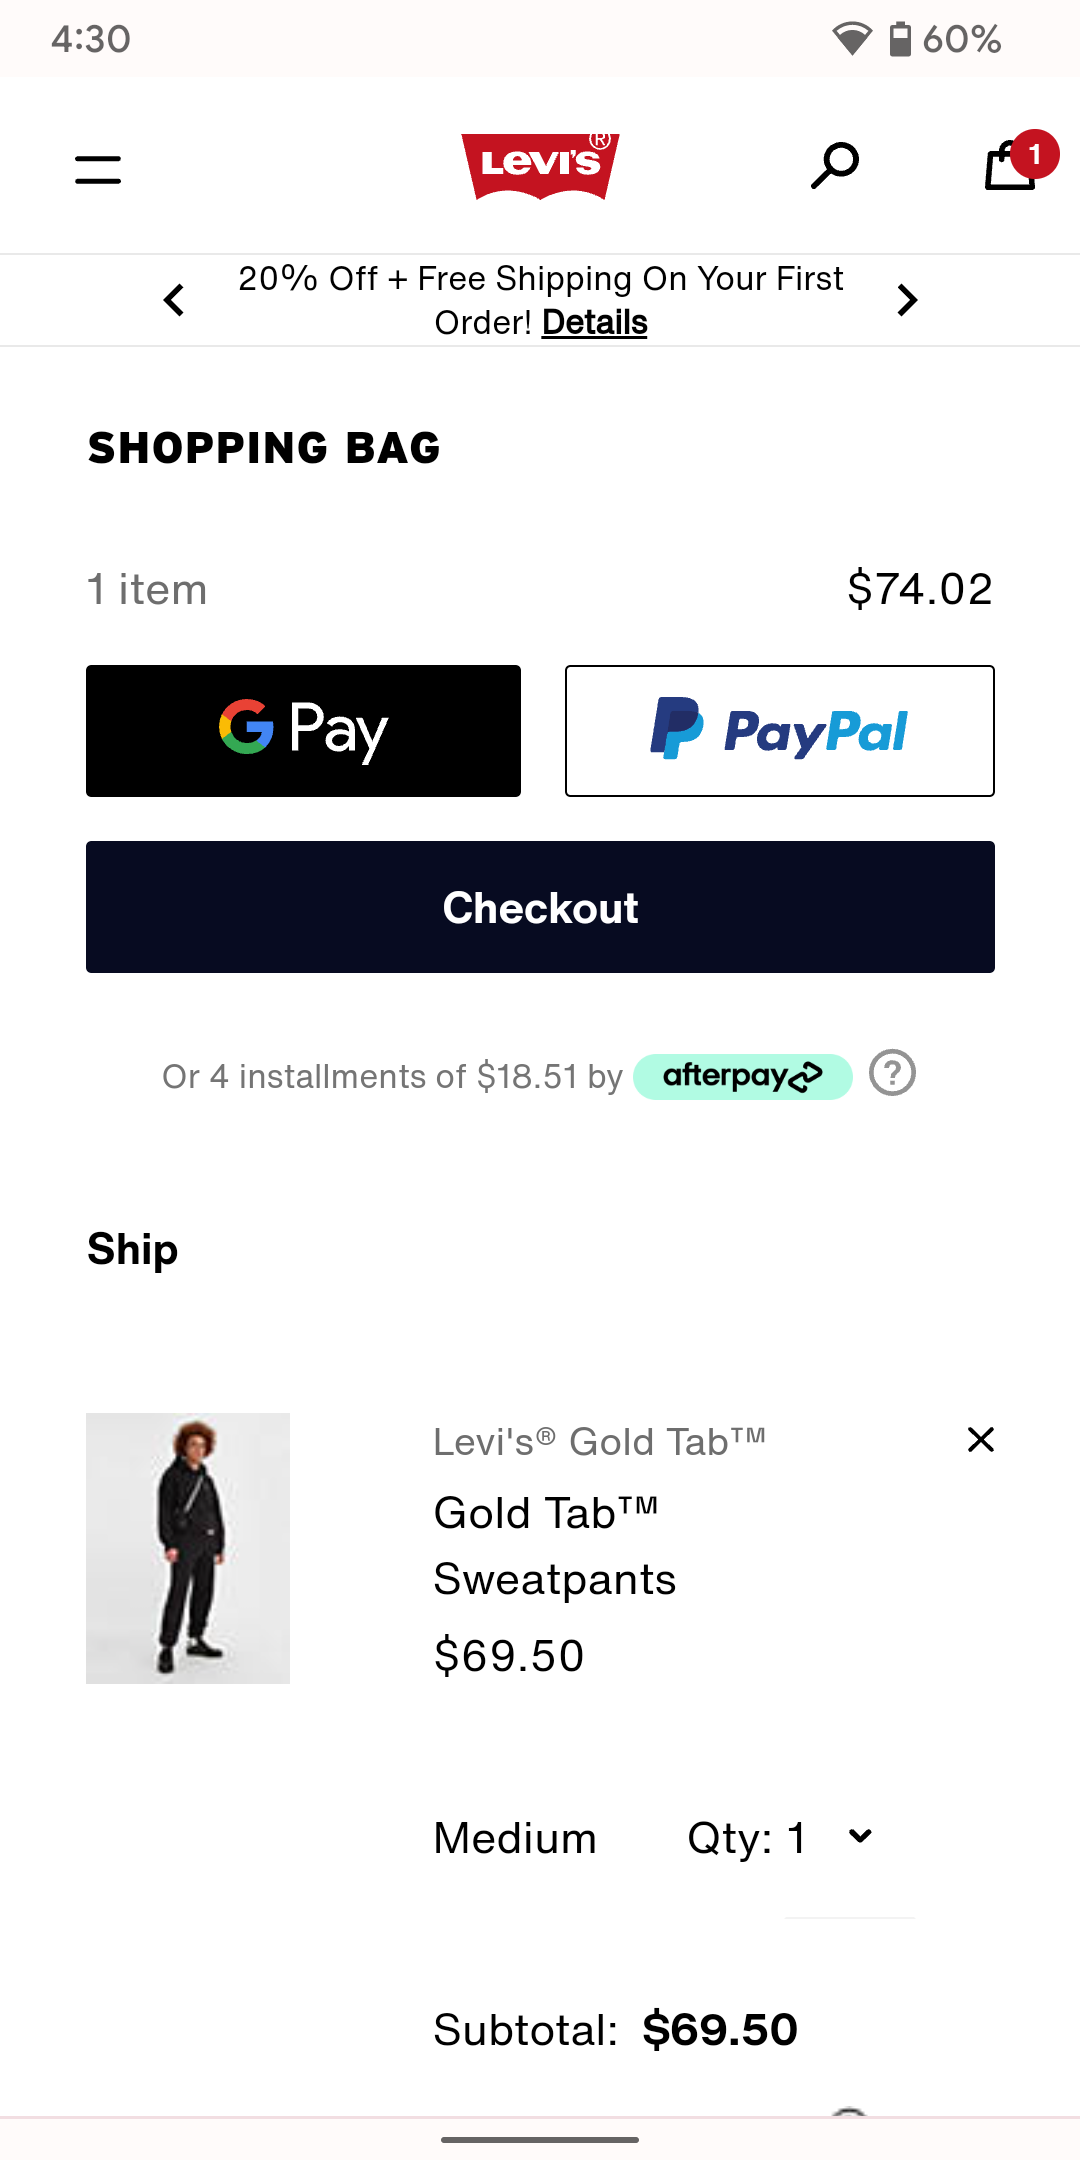 Levi's accepts Google Pay on its website.